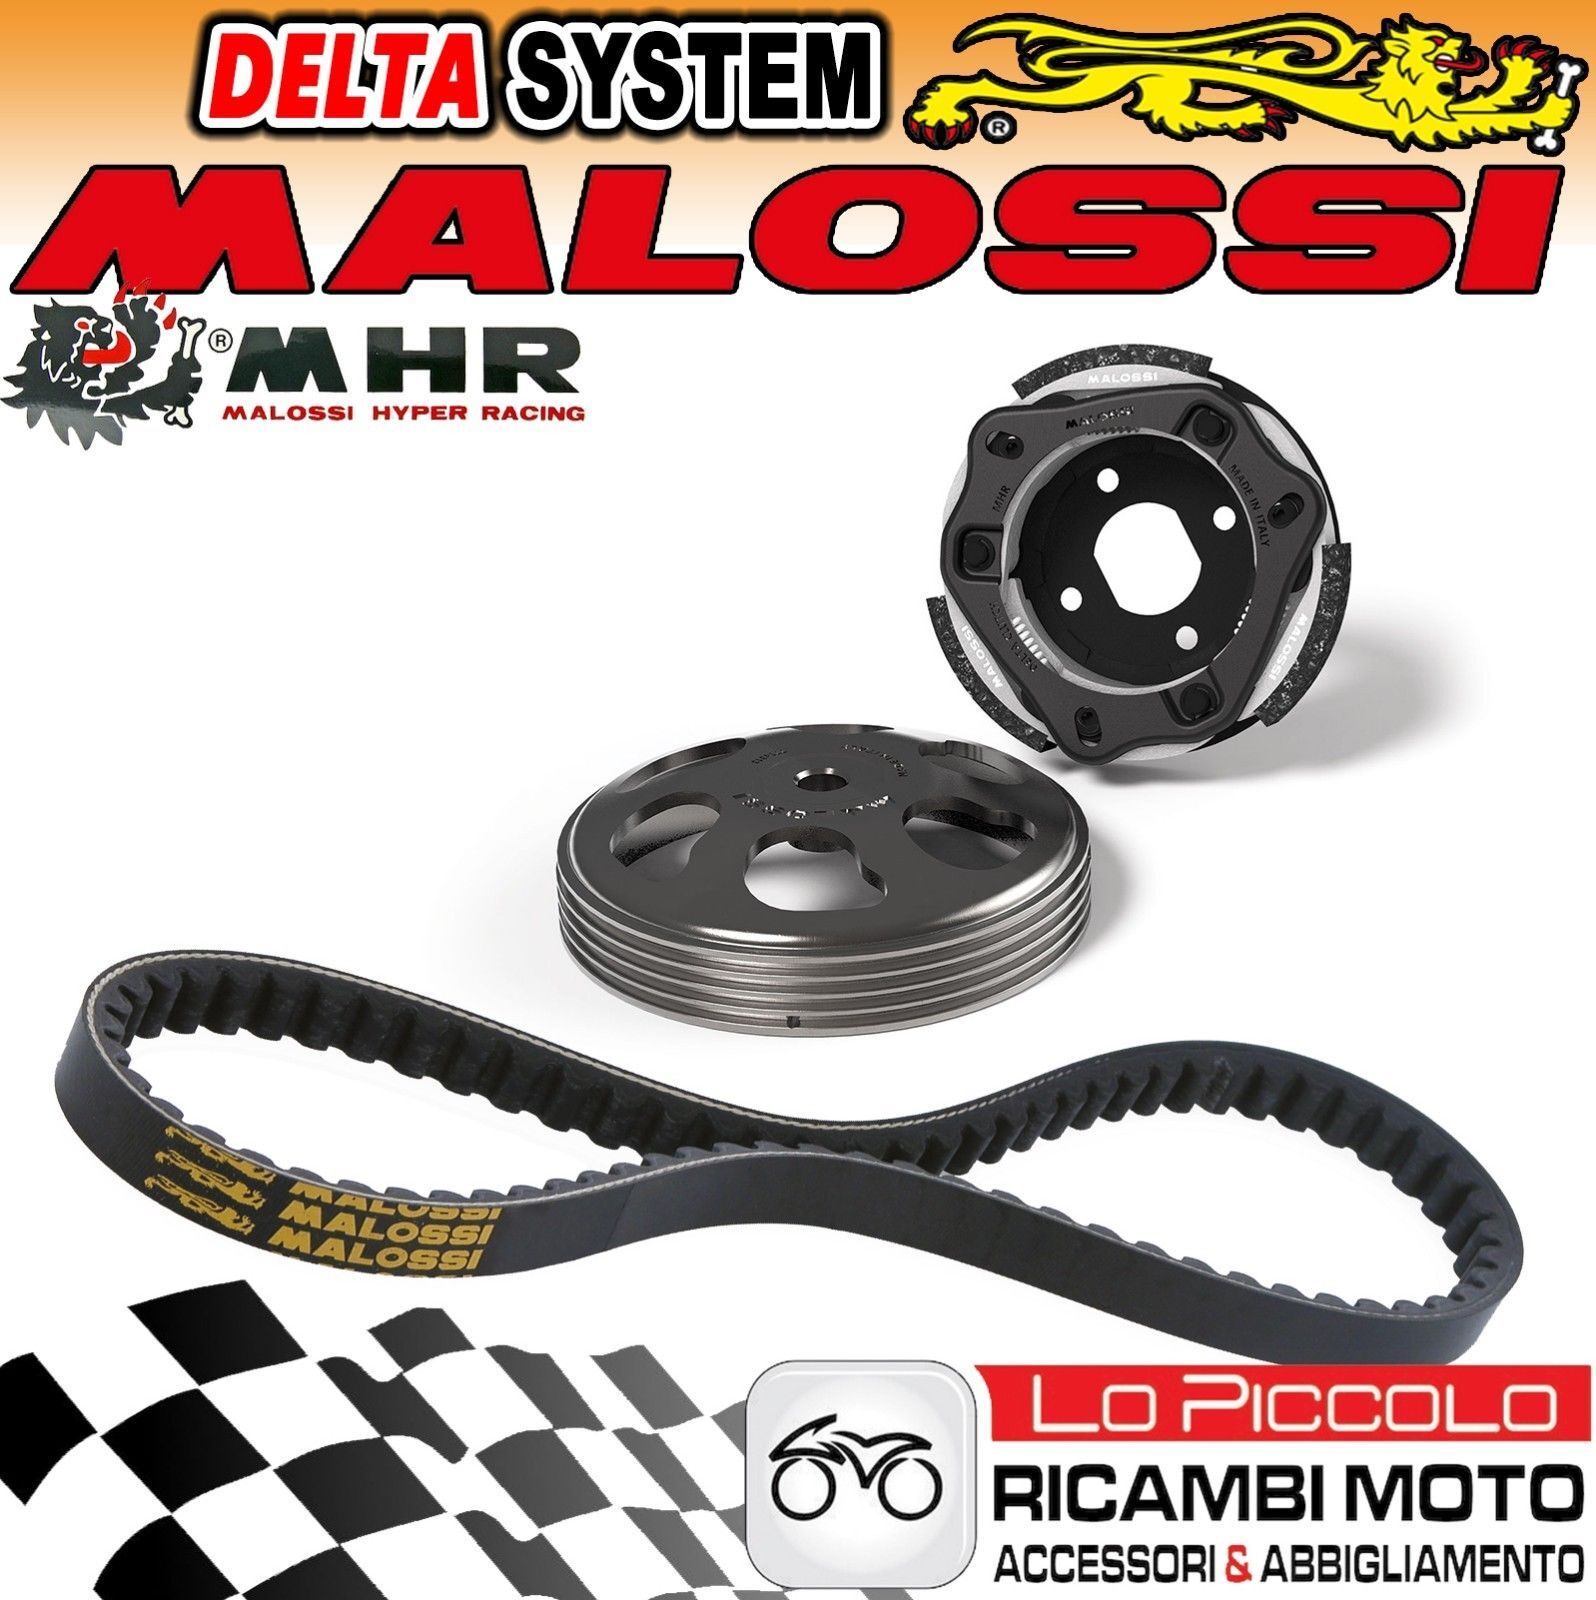 Clutch Bell MHR Delta Max 48% OFF System + MALOSSI Yesterday Superior 5 Belt Malaguti